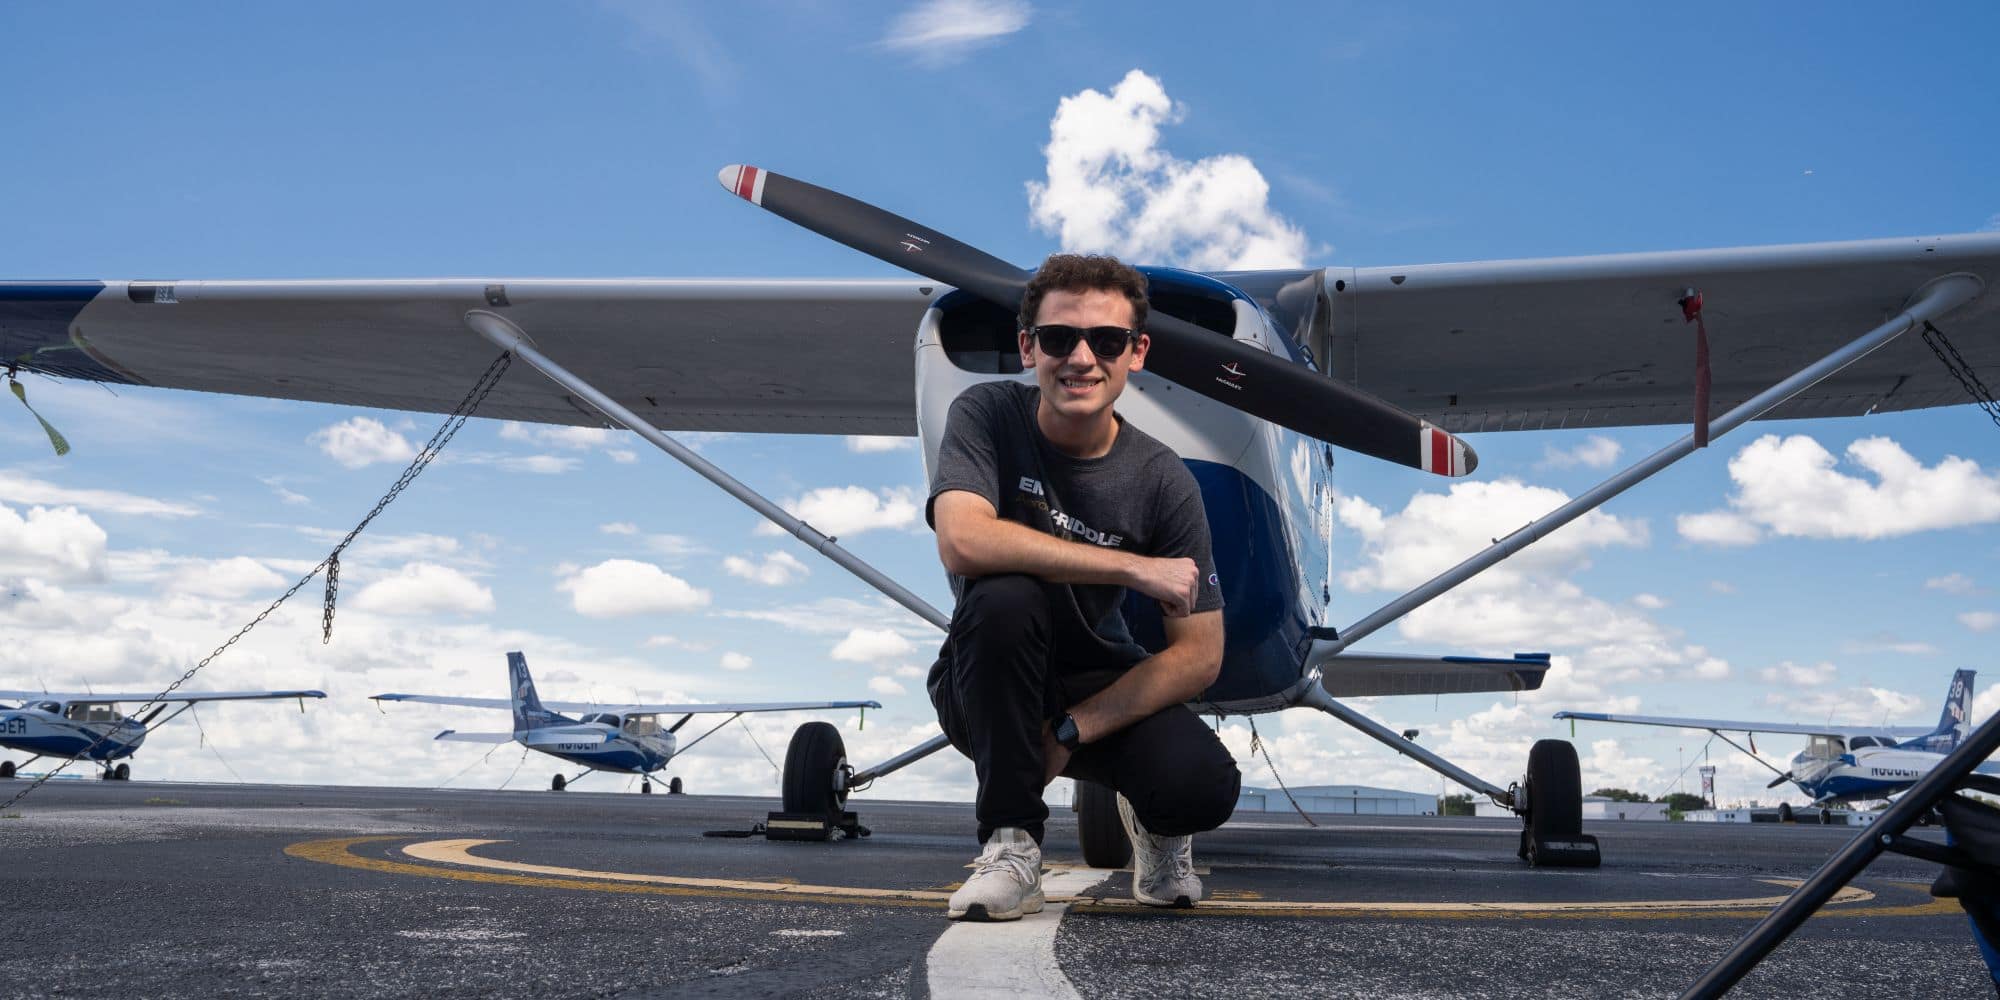 Hudson Garber with a plane from Embry-Riddle's fleet, on the Daytona Beach, Florida, campus. (Photo: Embry-Riddle / Bill Fredette-Huffman)